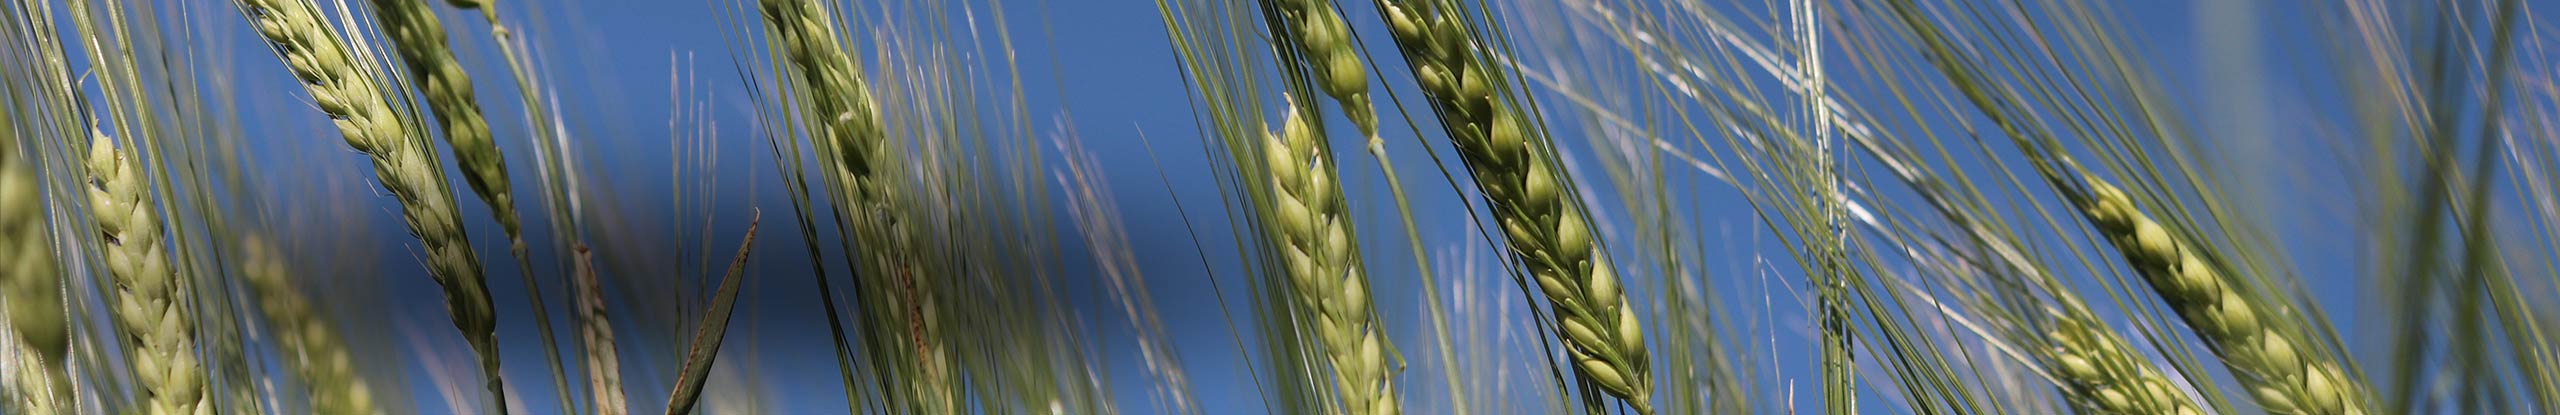 Agronomic practices to minimize lodging risk while maintaining yield potential in spring wheat